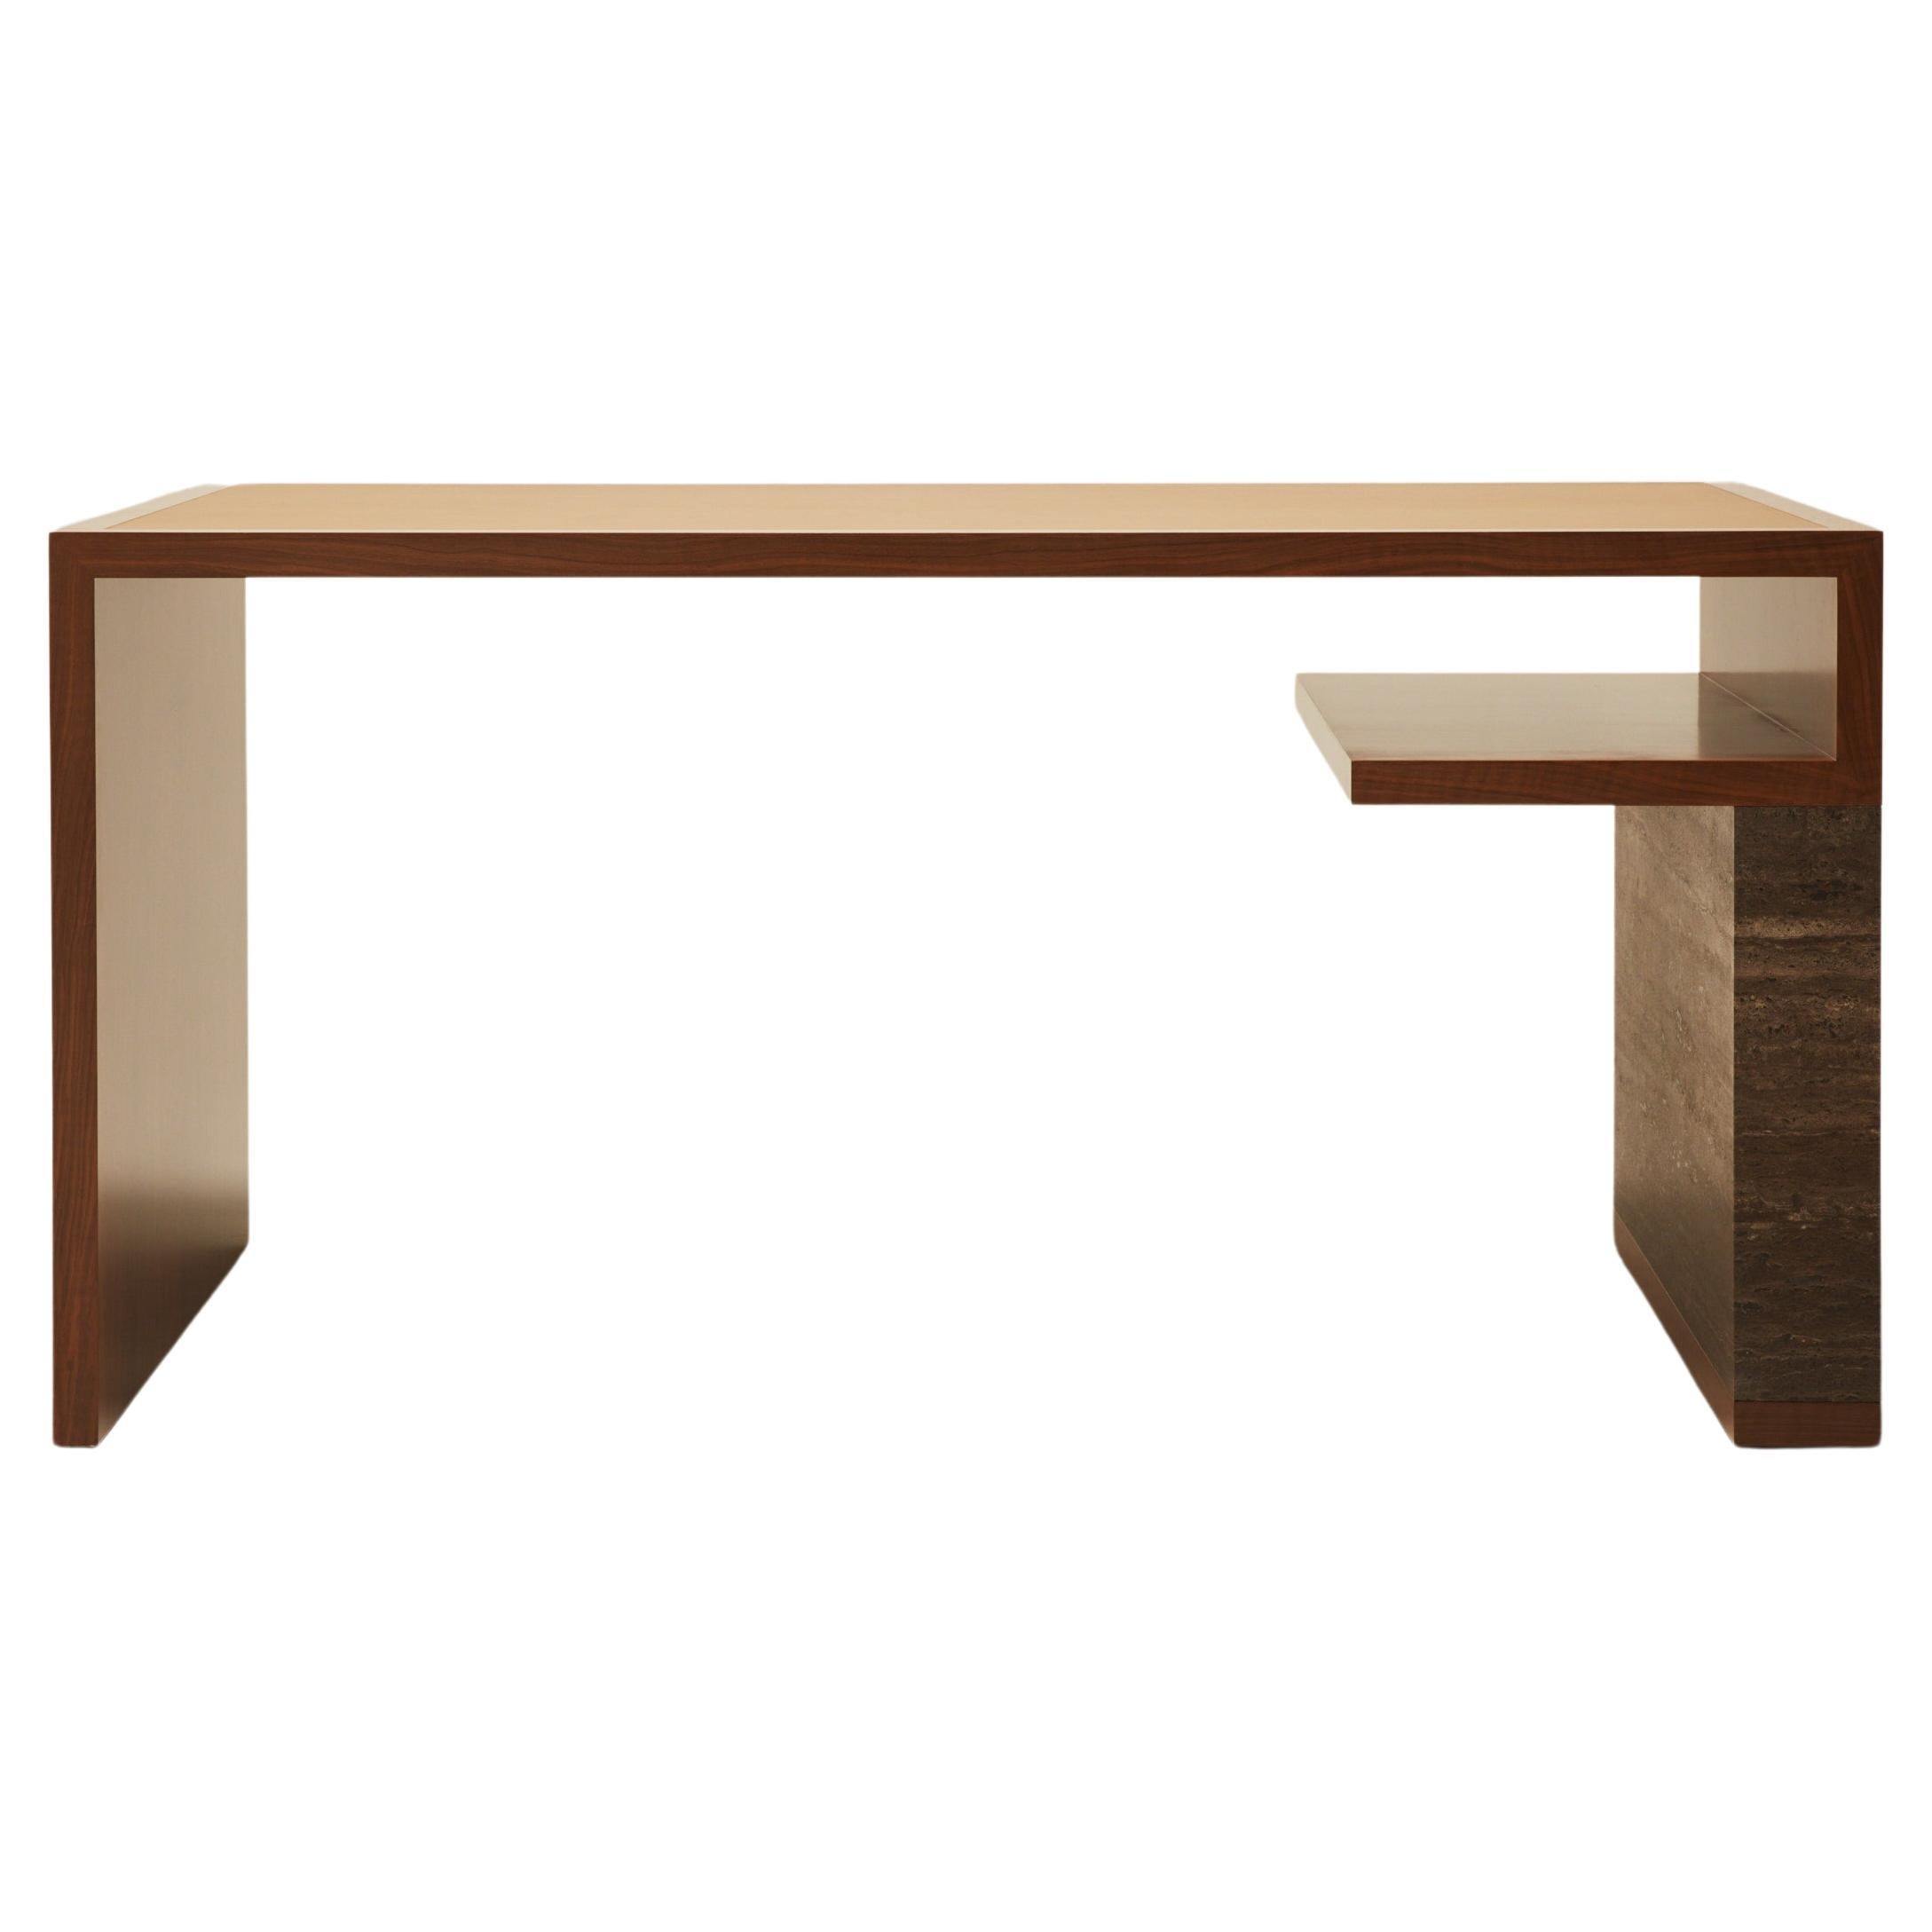 Continuous Writing Table - Hand applied wood veneer, leather & travertine